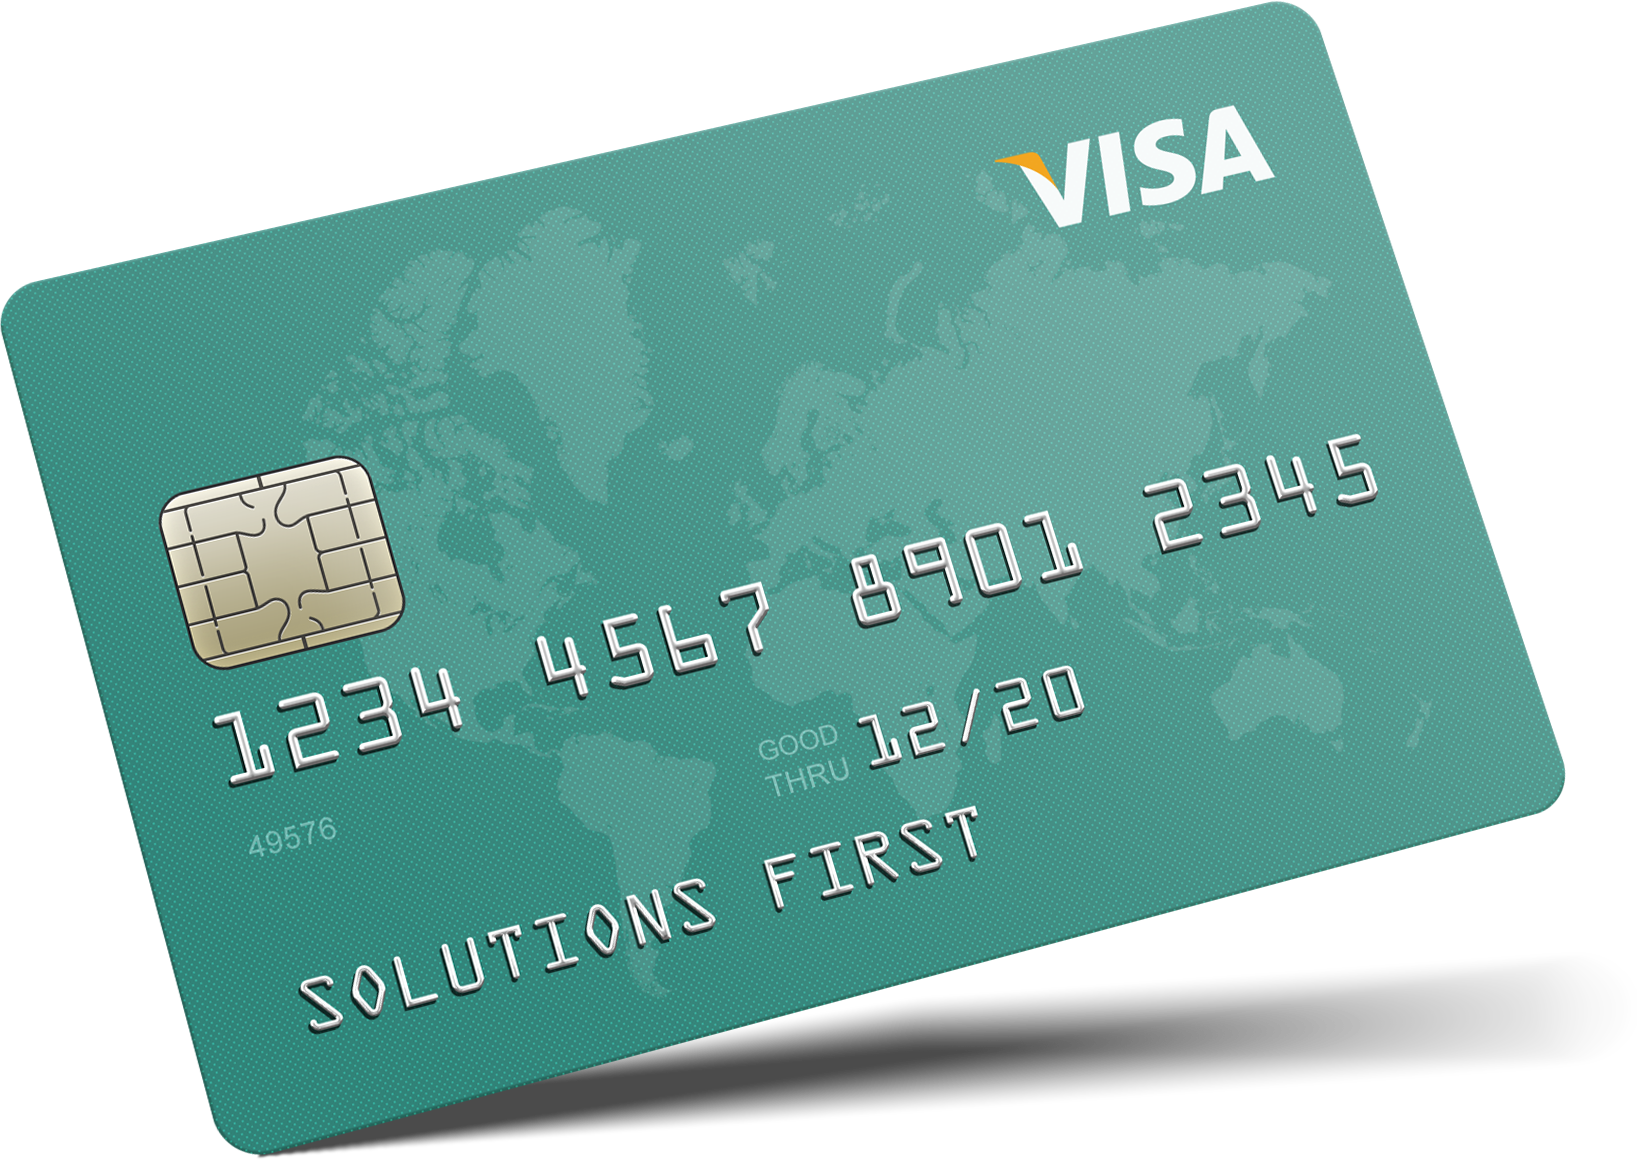 Apply for a Visa Credit Card with Solutions First Credit Union